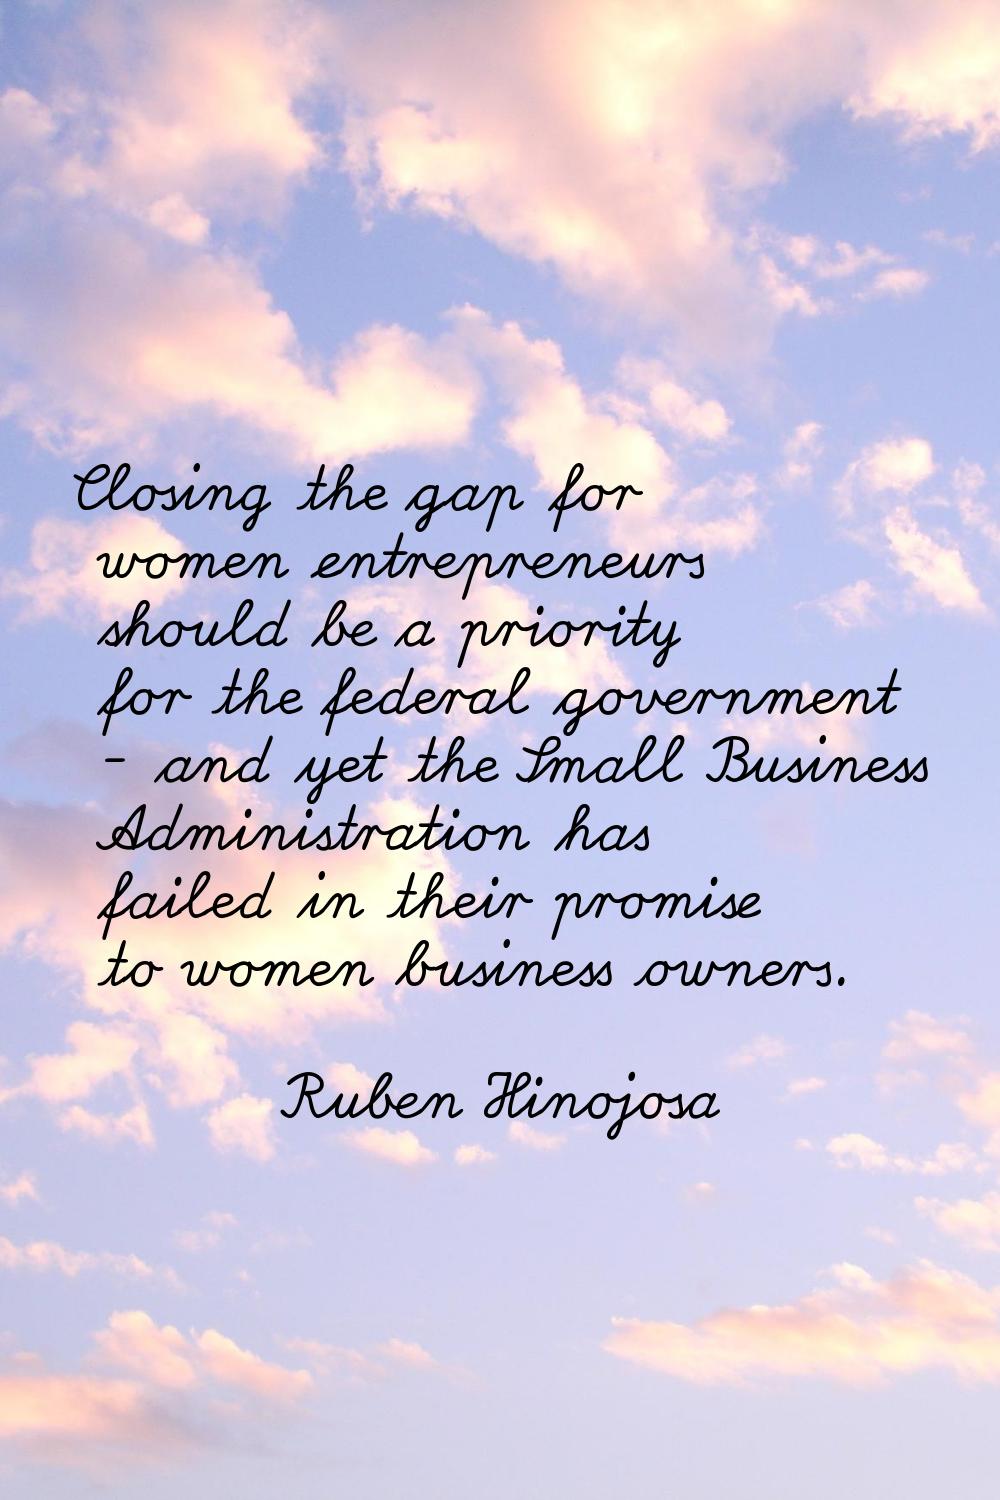 Closing the gap for women entrepreneurs should be a priority for the federal government - and yet t